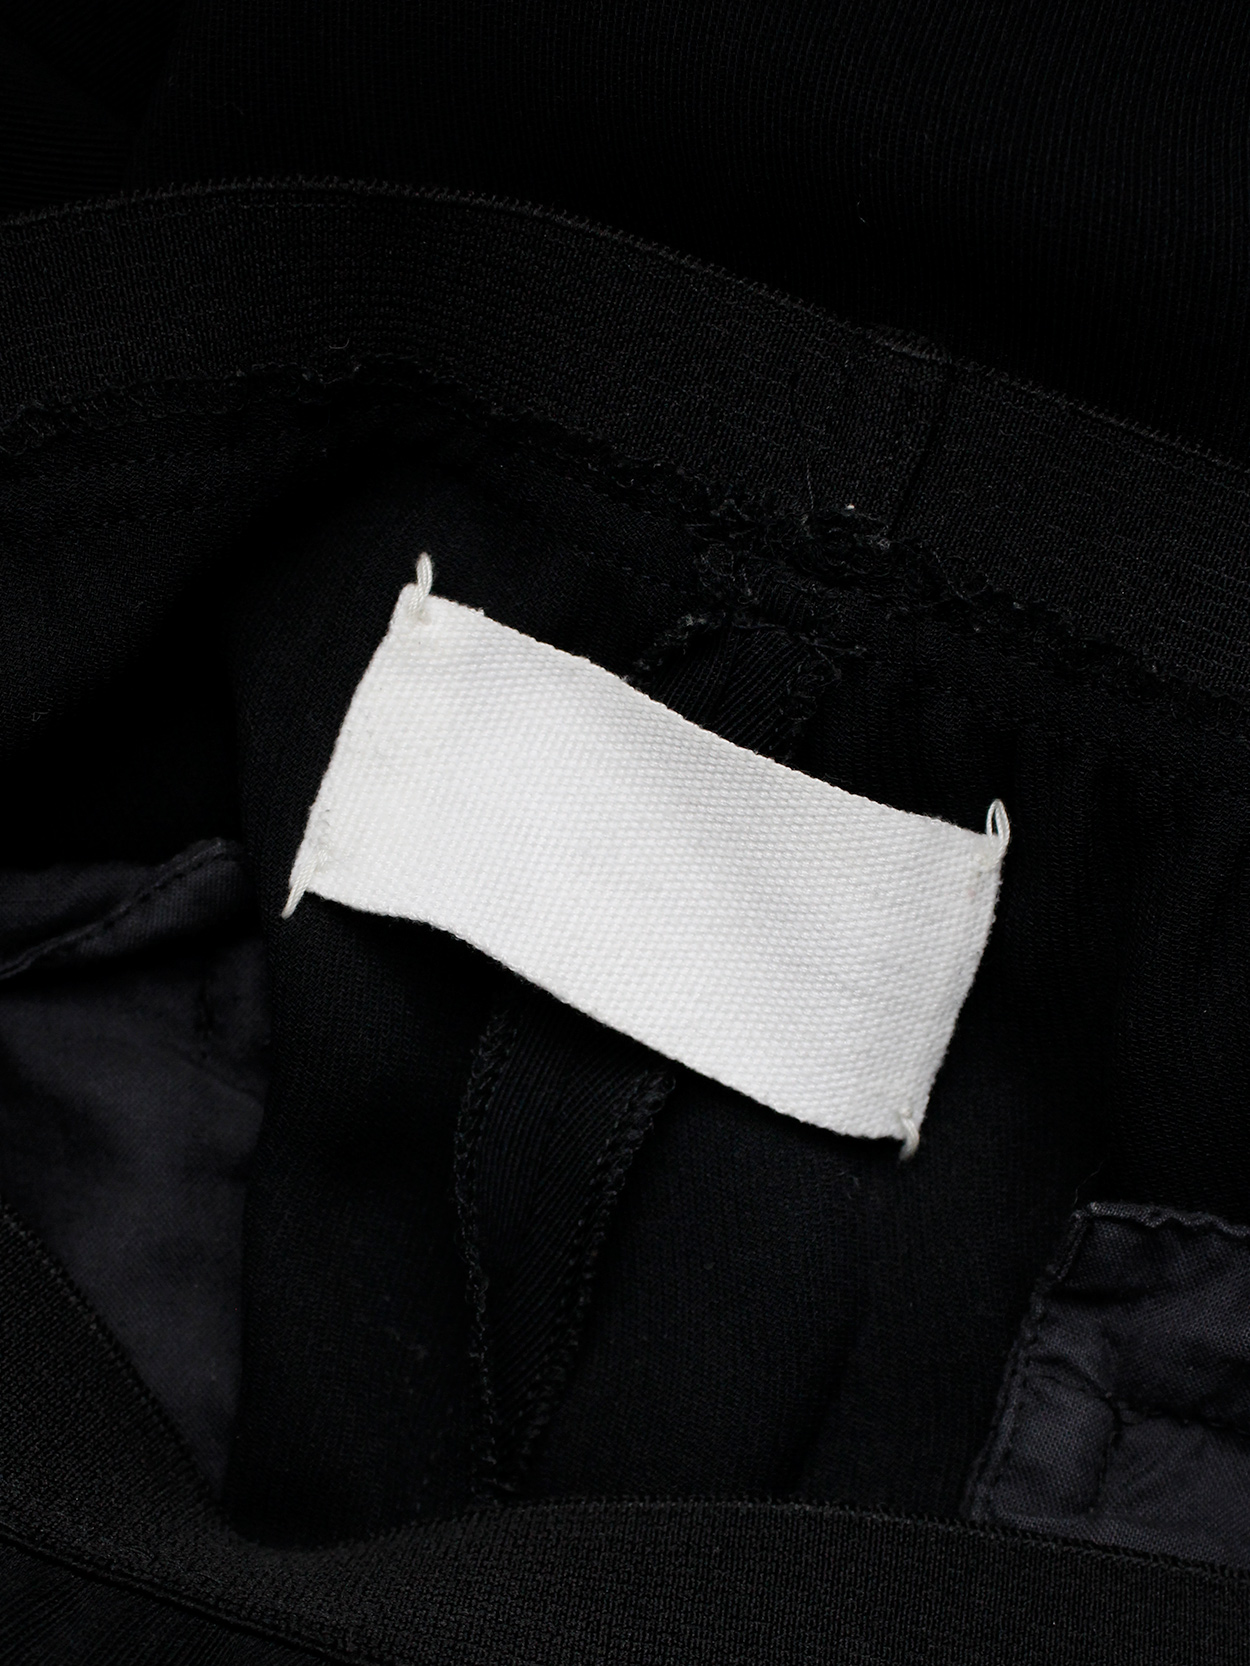 Maison Martin Margiela black trousers with seemingly stretched out ...